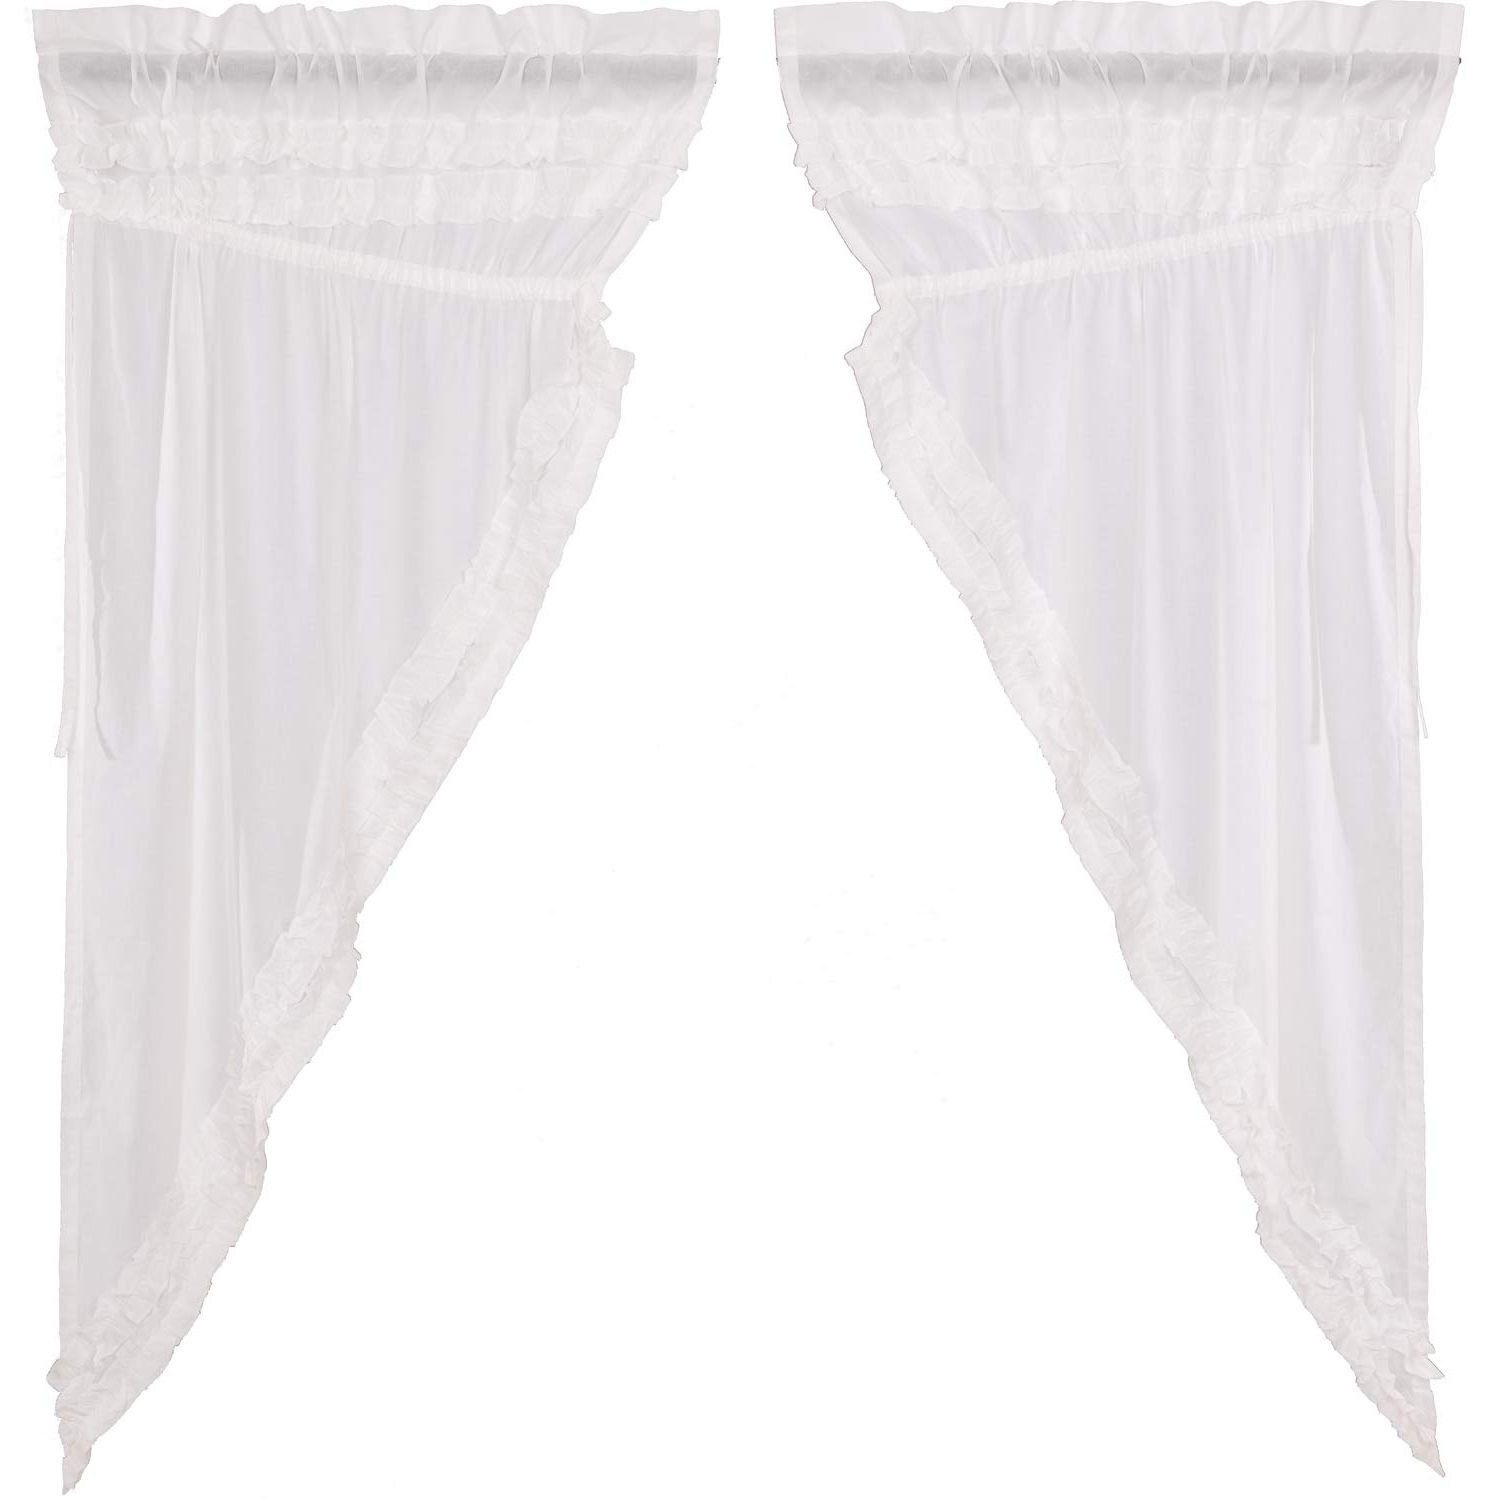 Rod Pocket Cotton Solid Color Ruched Ruffle Kitchen Curtains With Regard To Current Amazon: Vhc Brands Farmhouse Curtains White Petticoat (View 14 of 20)